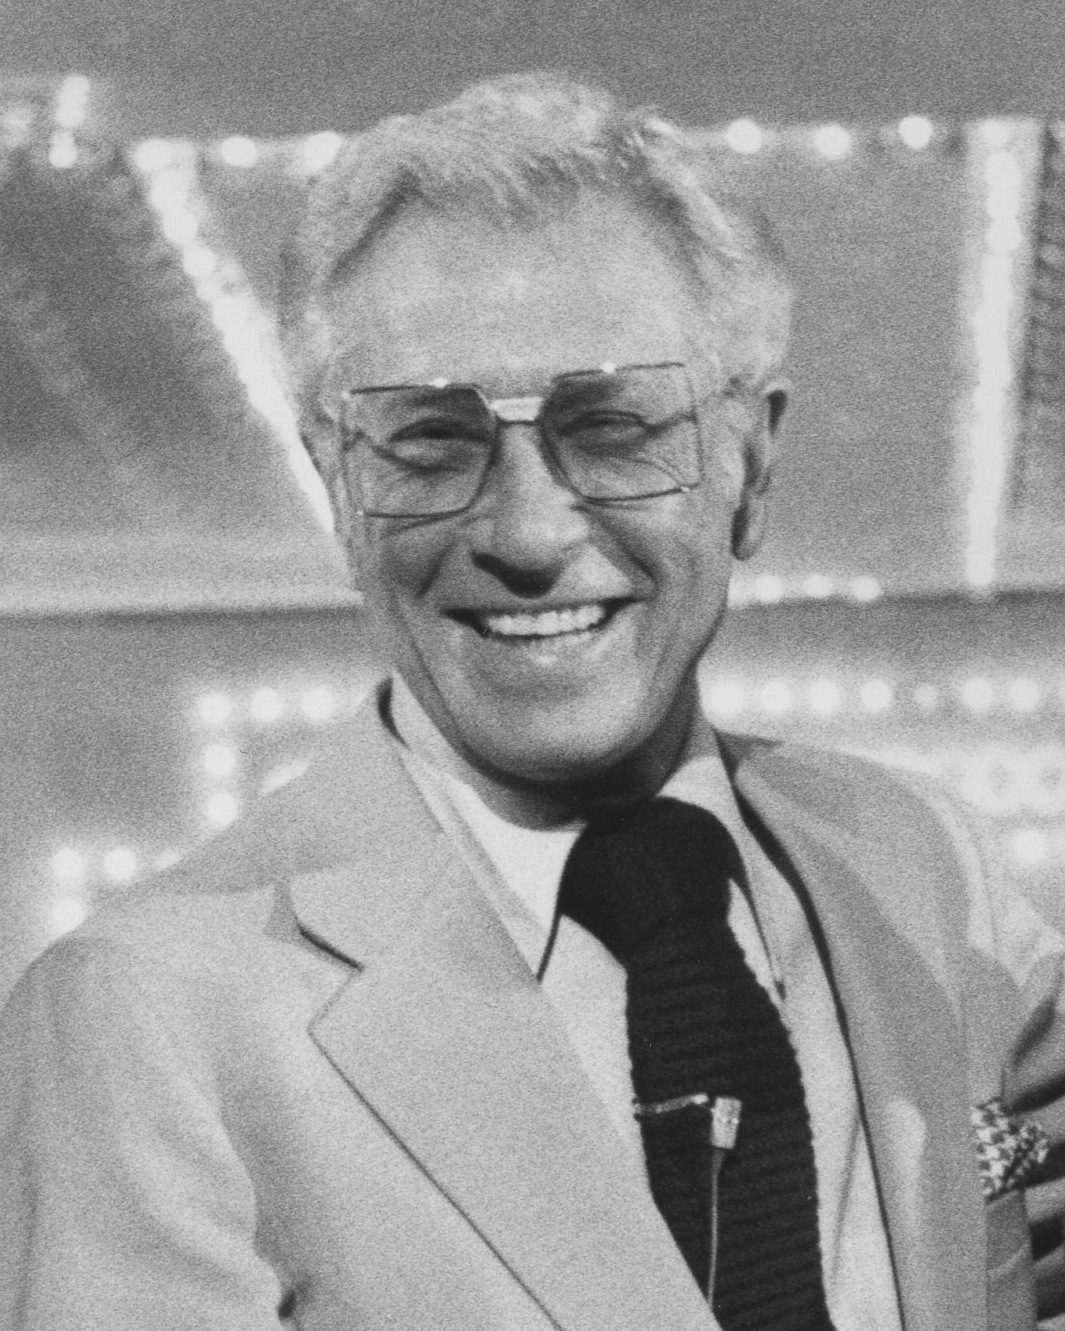 Smiling Allen Ludden wearing a suit and eyeglasses